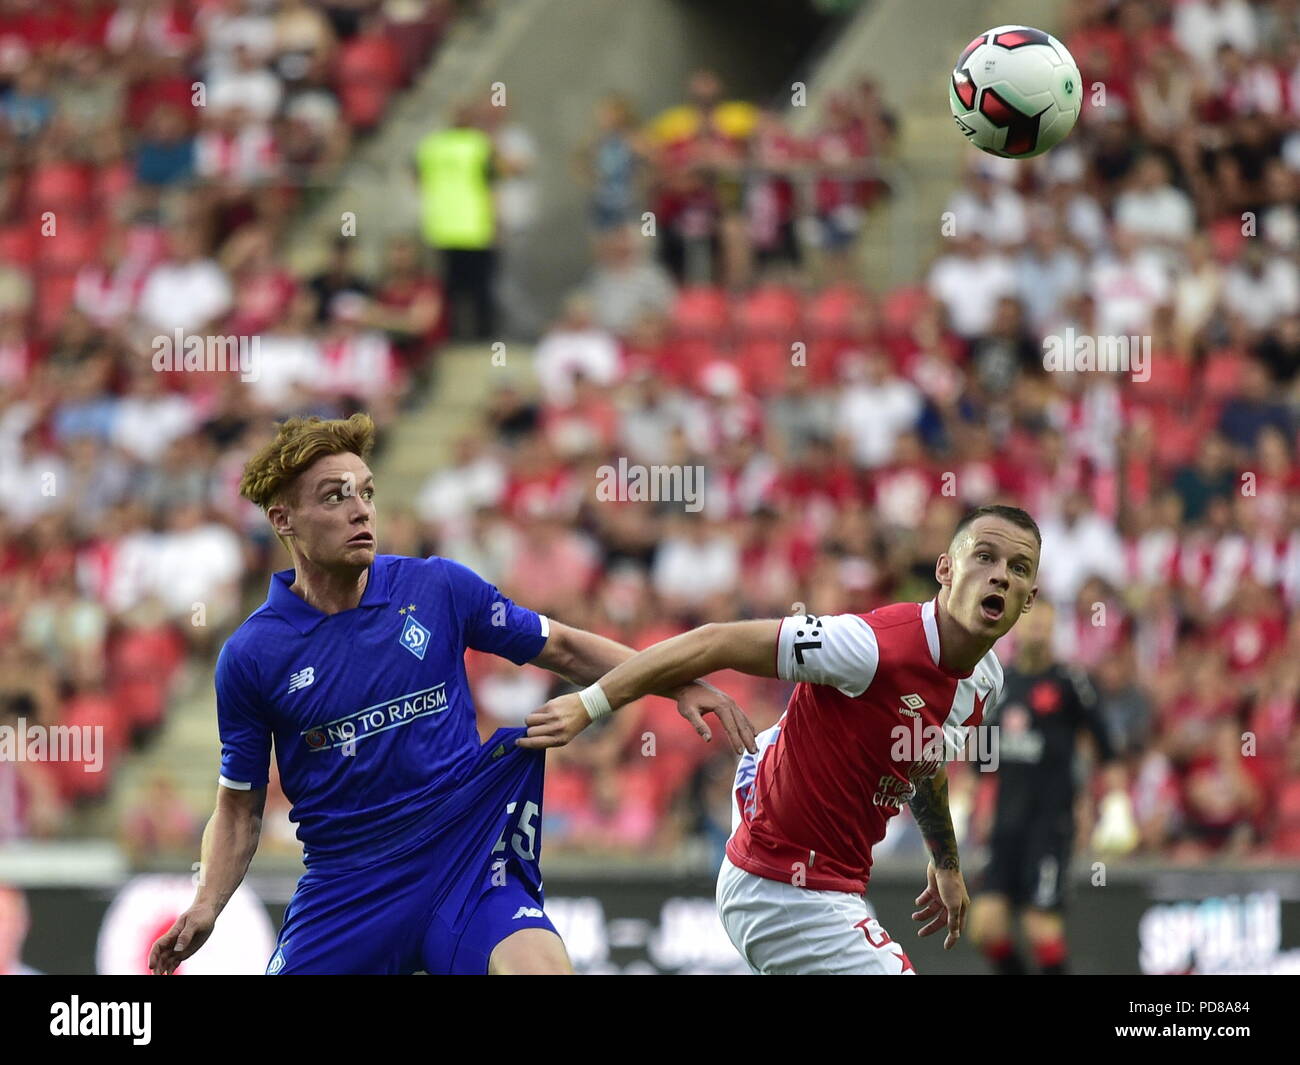 Prague, Czech Republic. 07th Aug, 2018. From left VIKTOR CYGANKOV of Dynamo Kiev and JAN SYKORA of Slavia Praha in action during the 3rd qualifying round of football Champions League, first match in Prague, Czech Republic, August 7, 2018. Credit: Ondrej Deml/CTK Photo/Alamy Live News Stock Photo